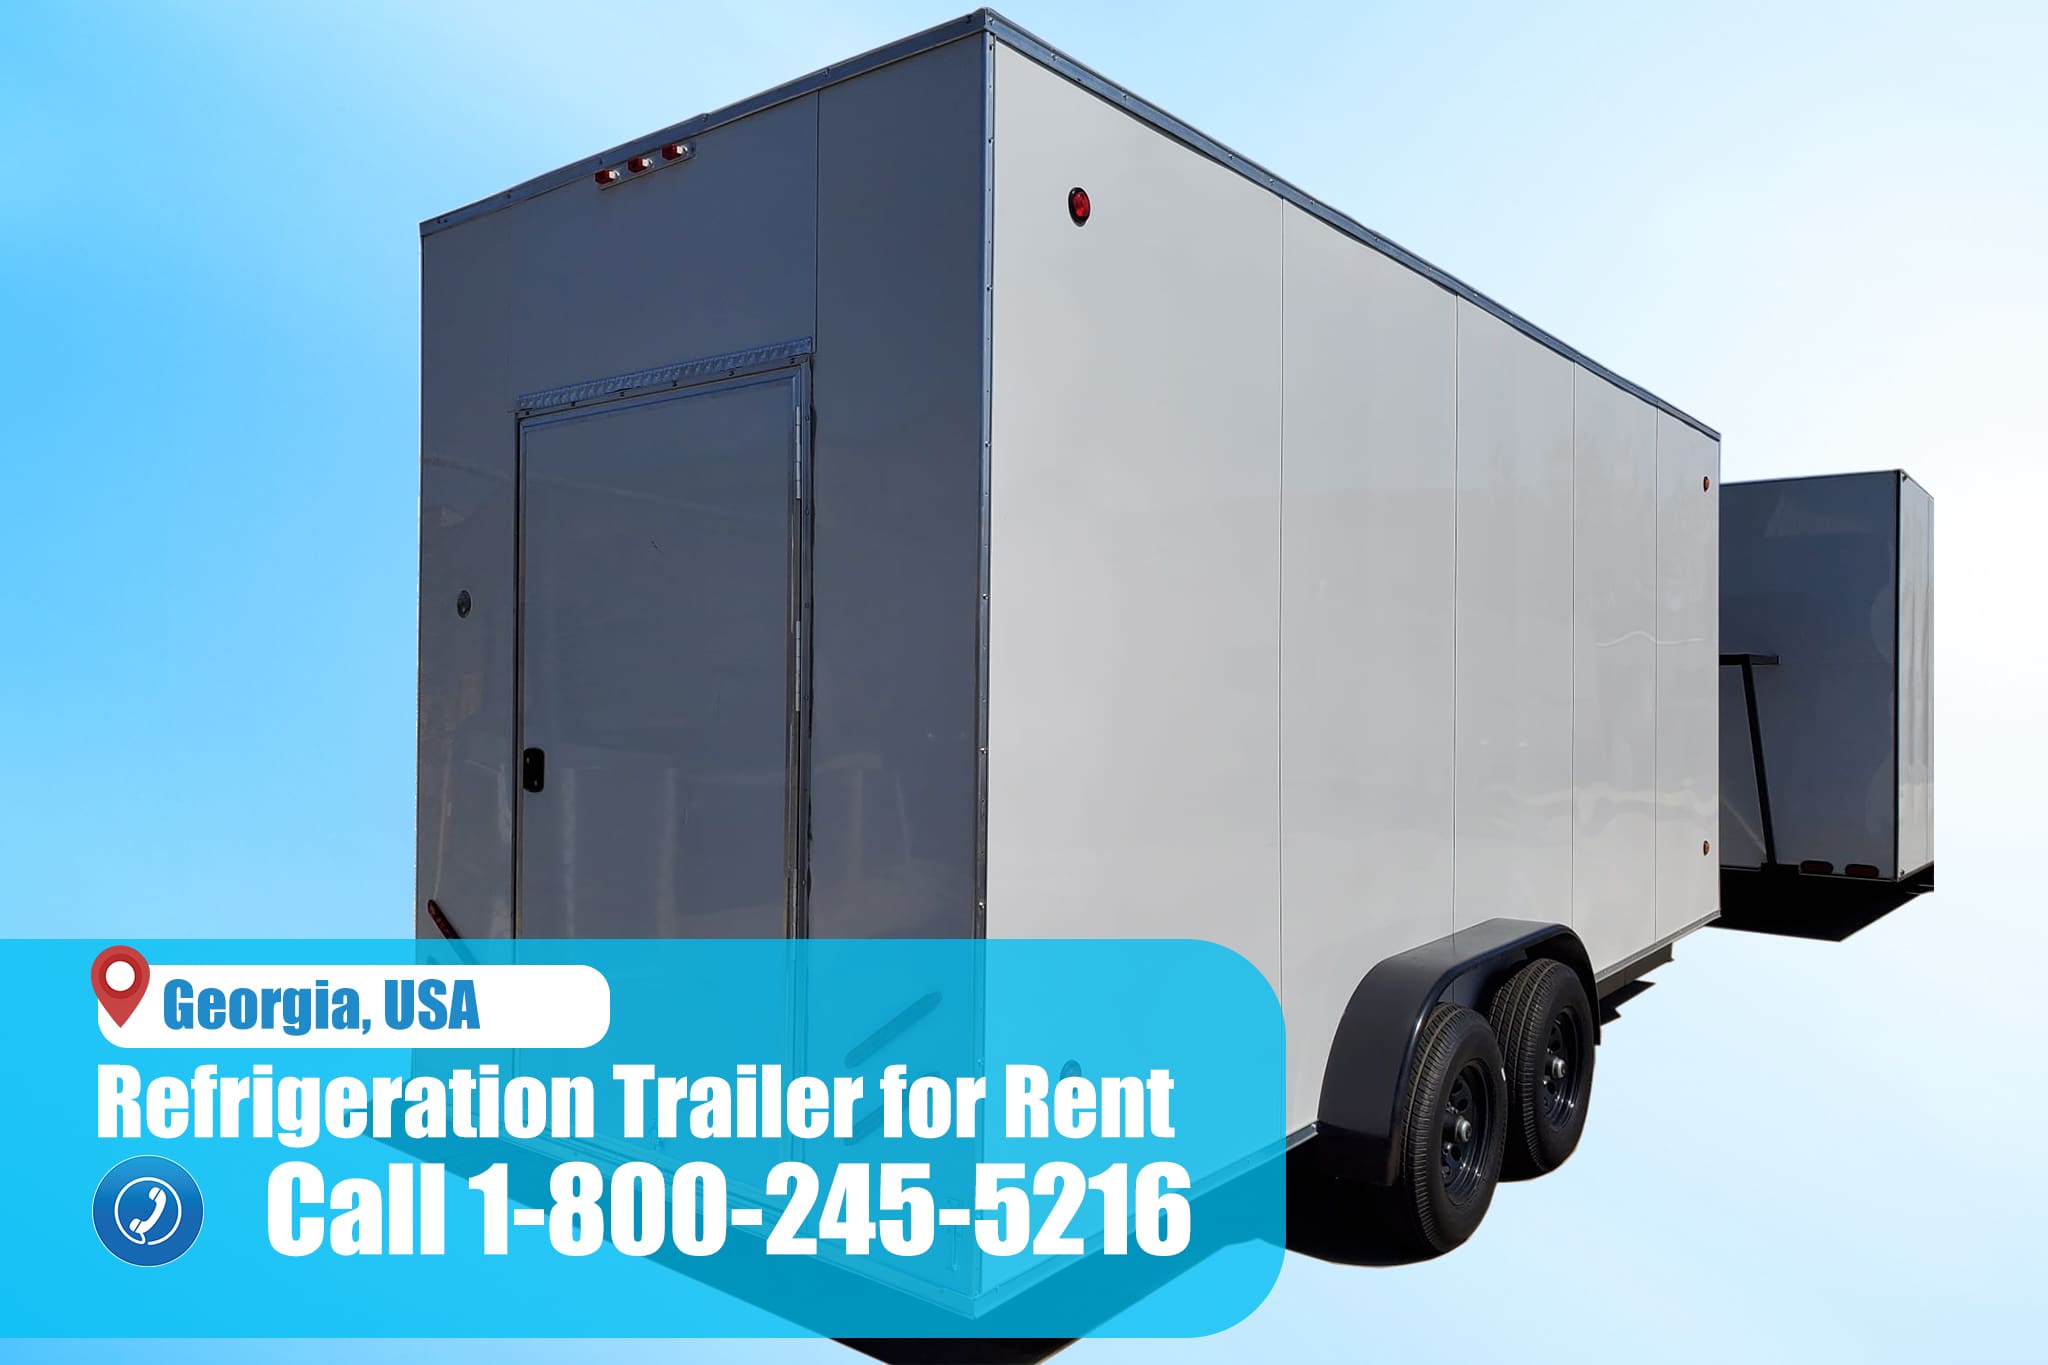 Refrigeration Trailer For Rent in Georgia